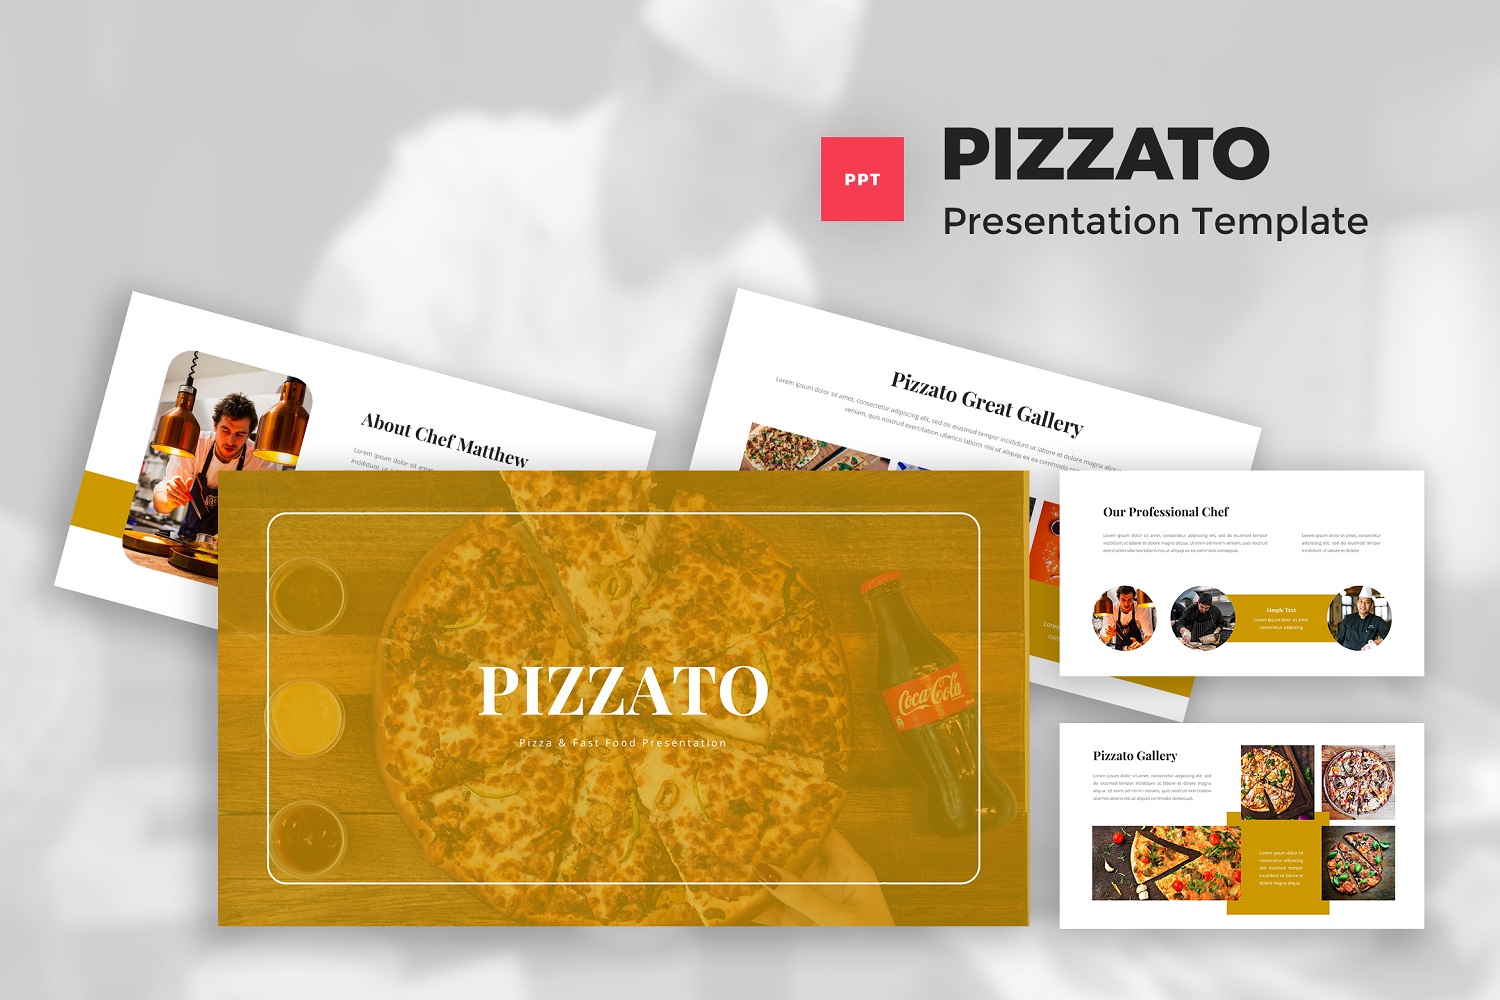 Pizzato - Pizza & Fast Food Powerpoint Template